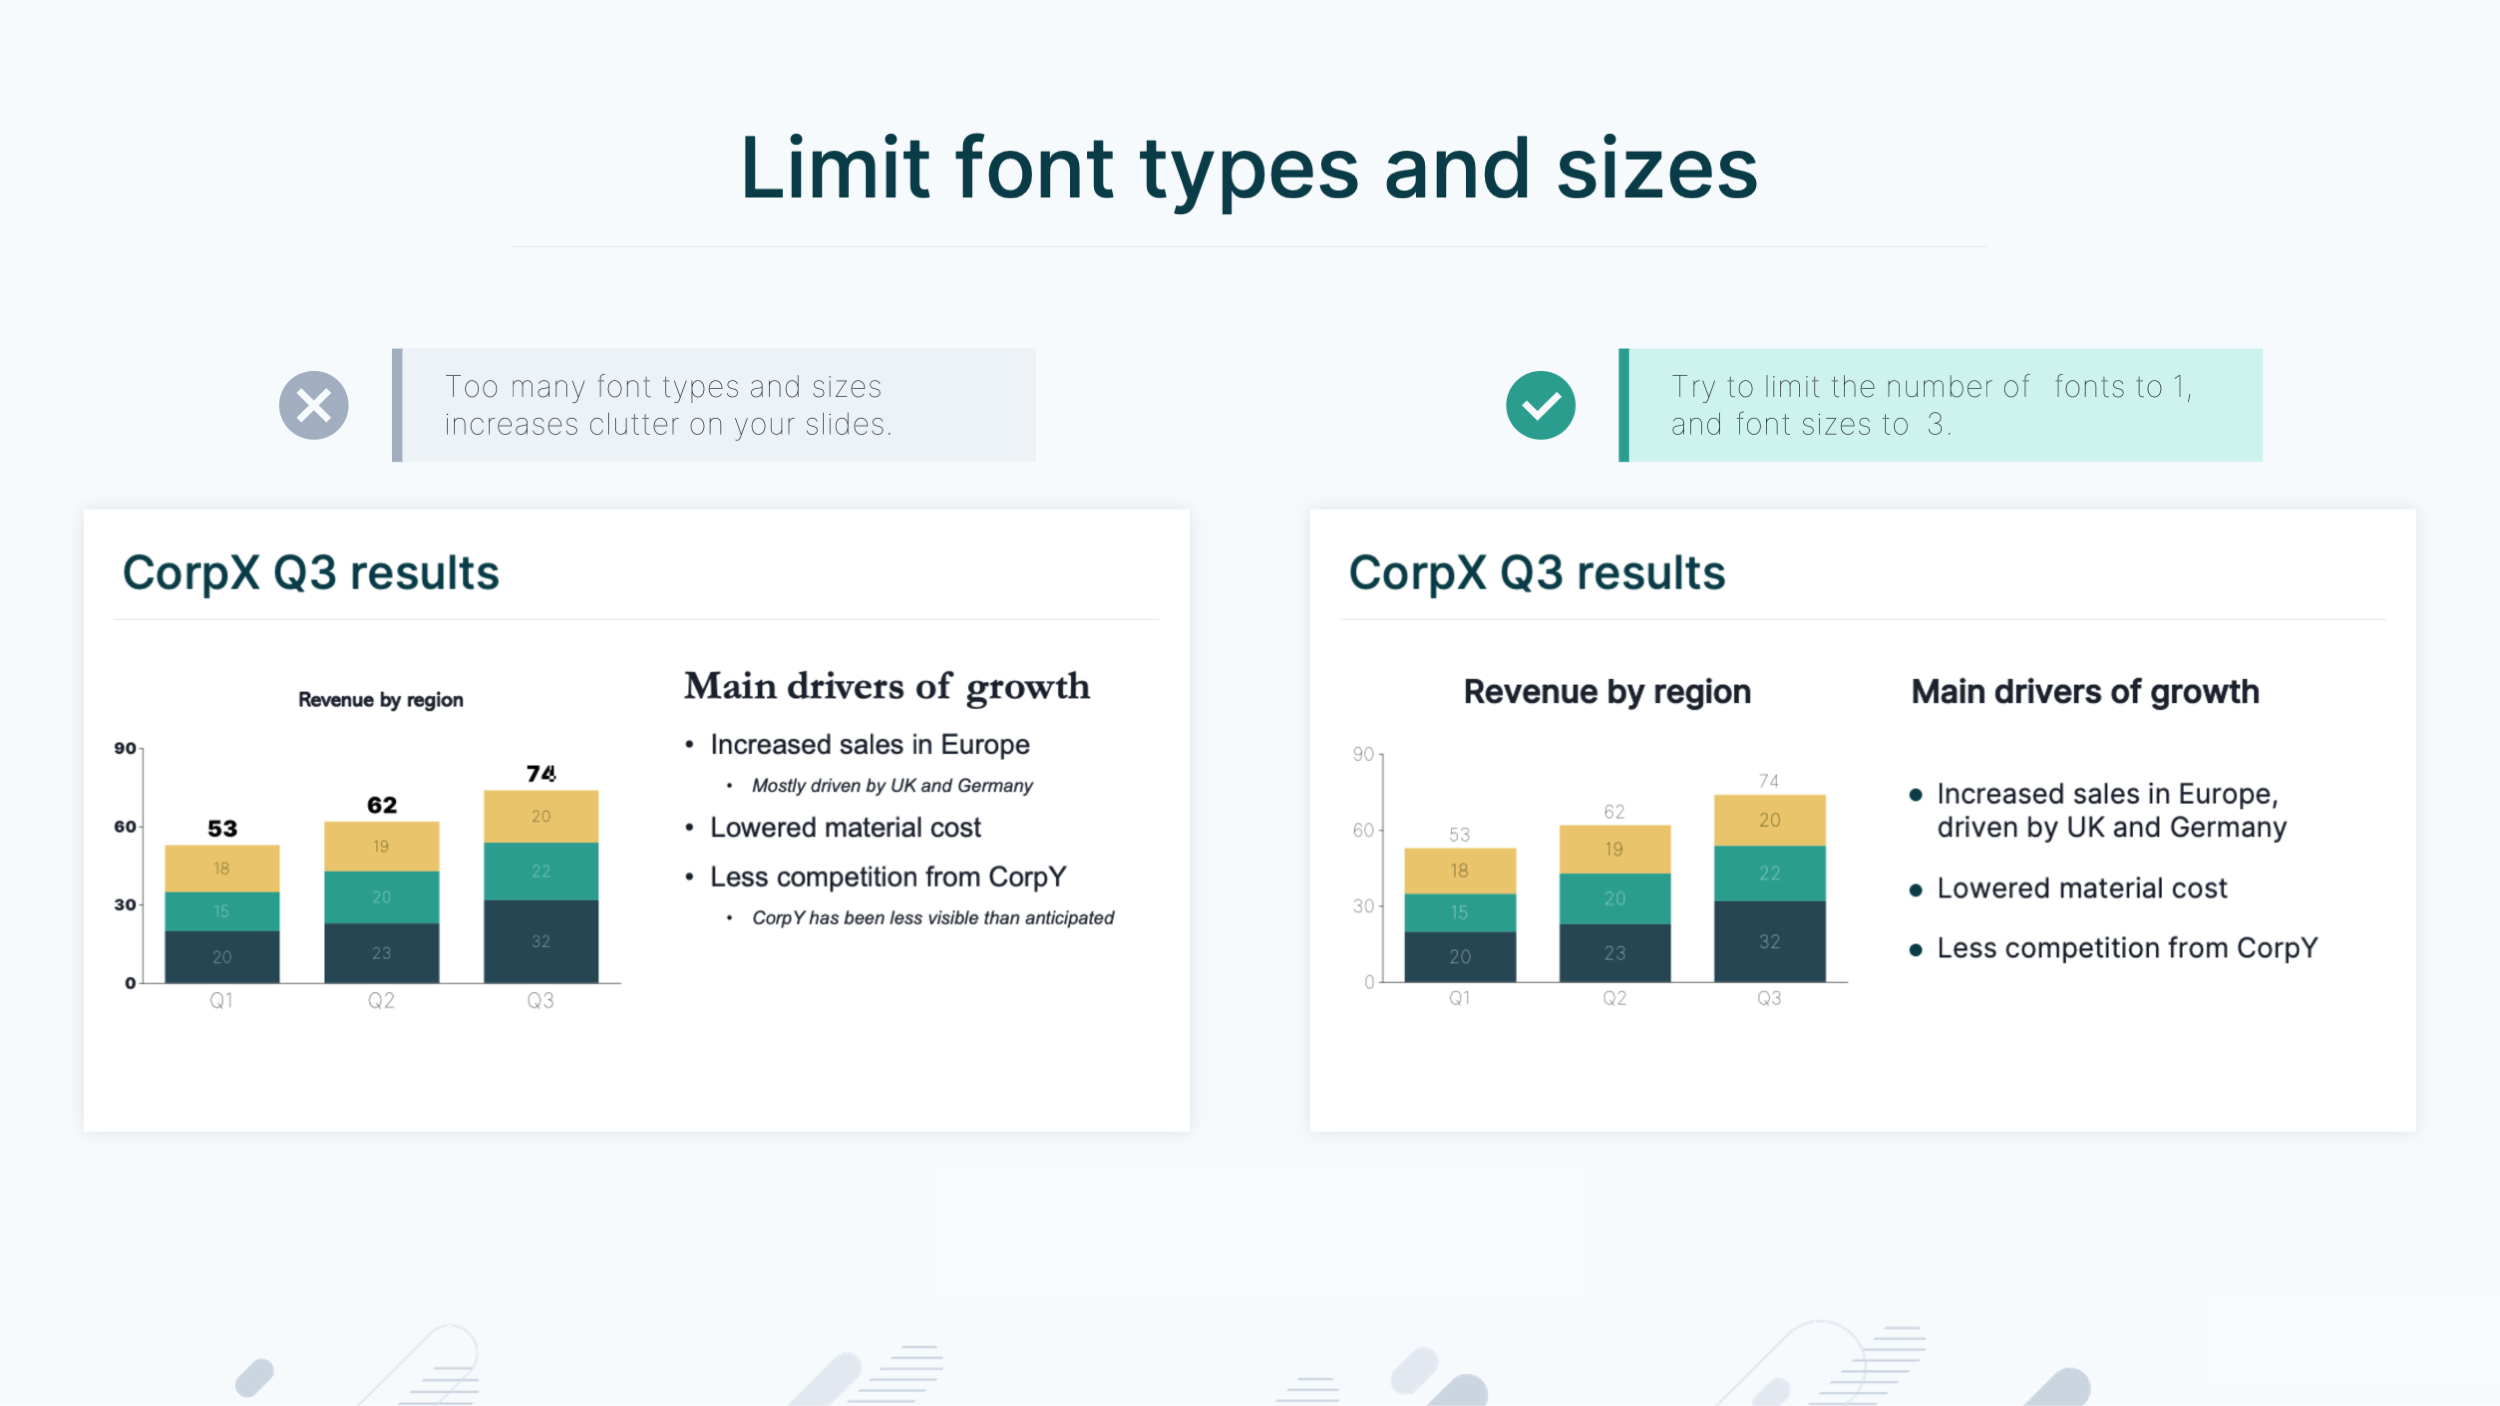 Limit font types and sizes